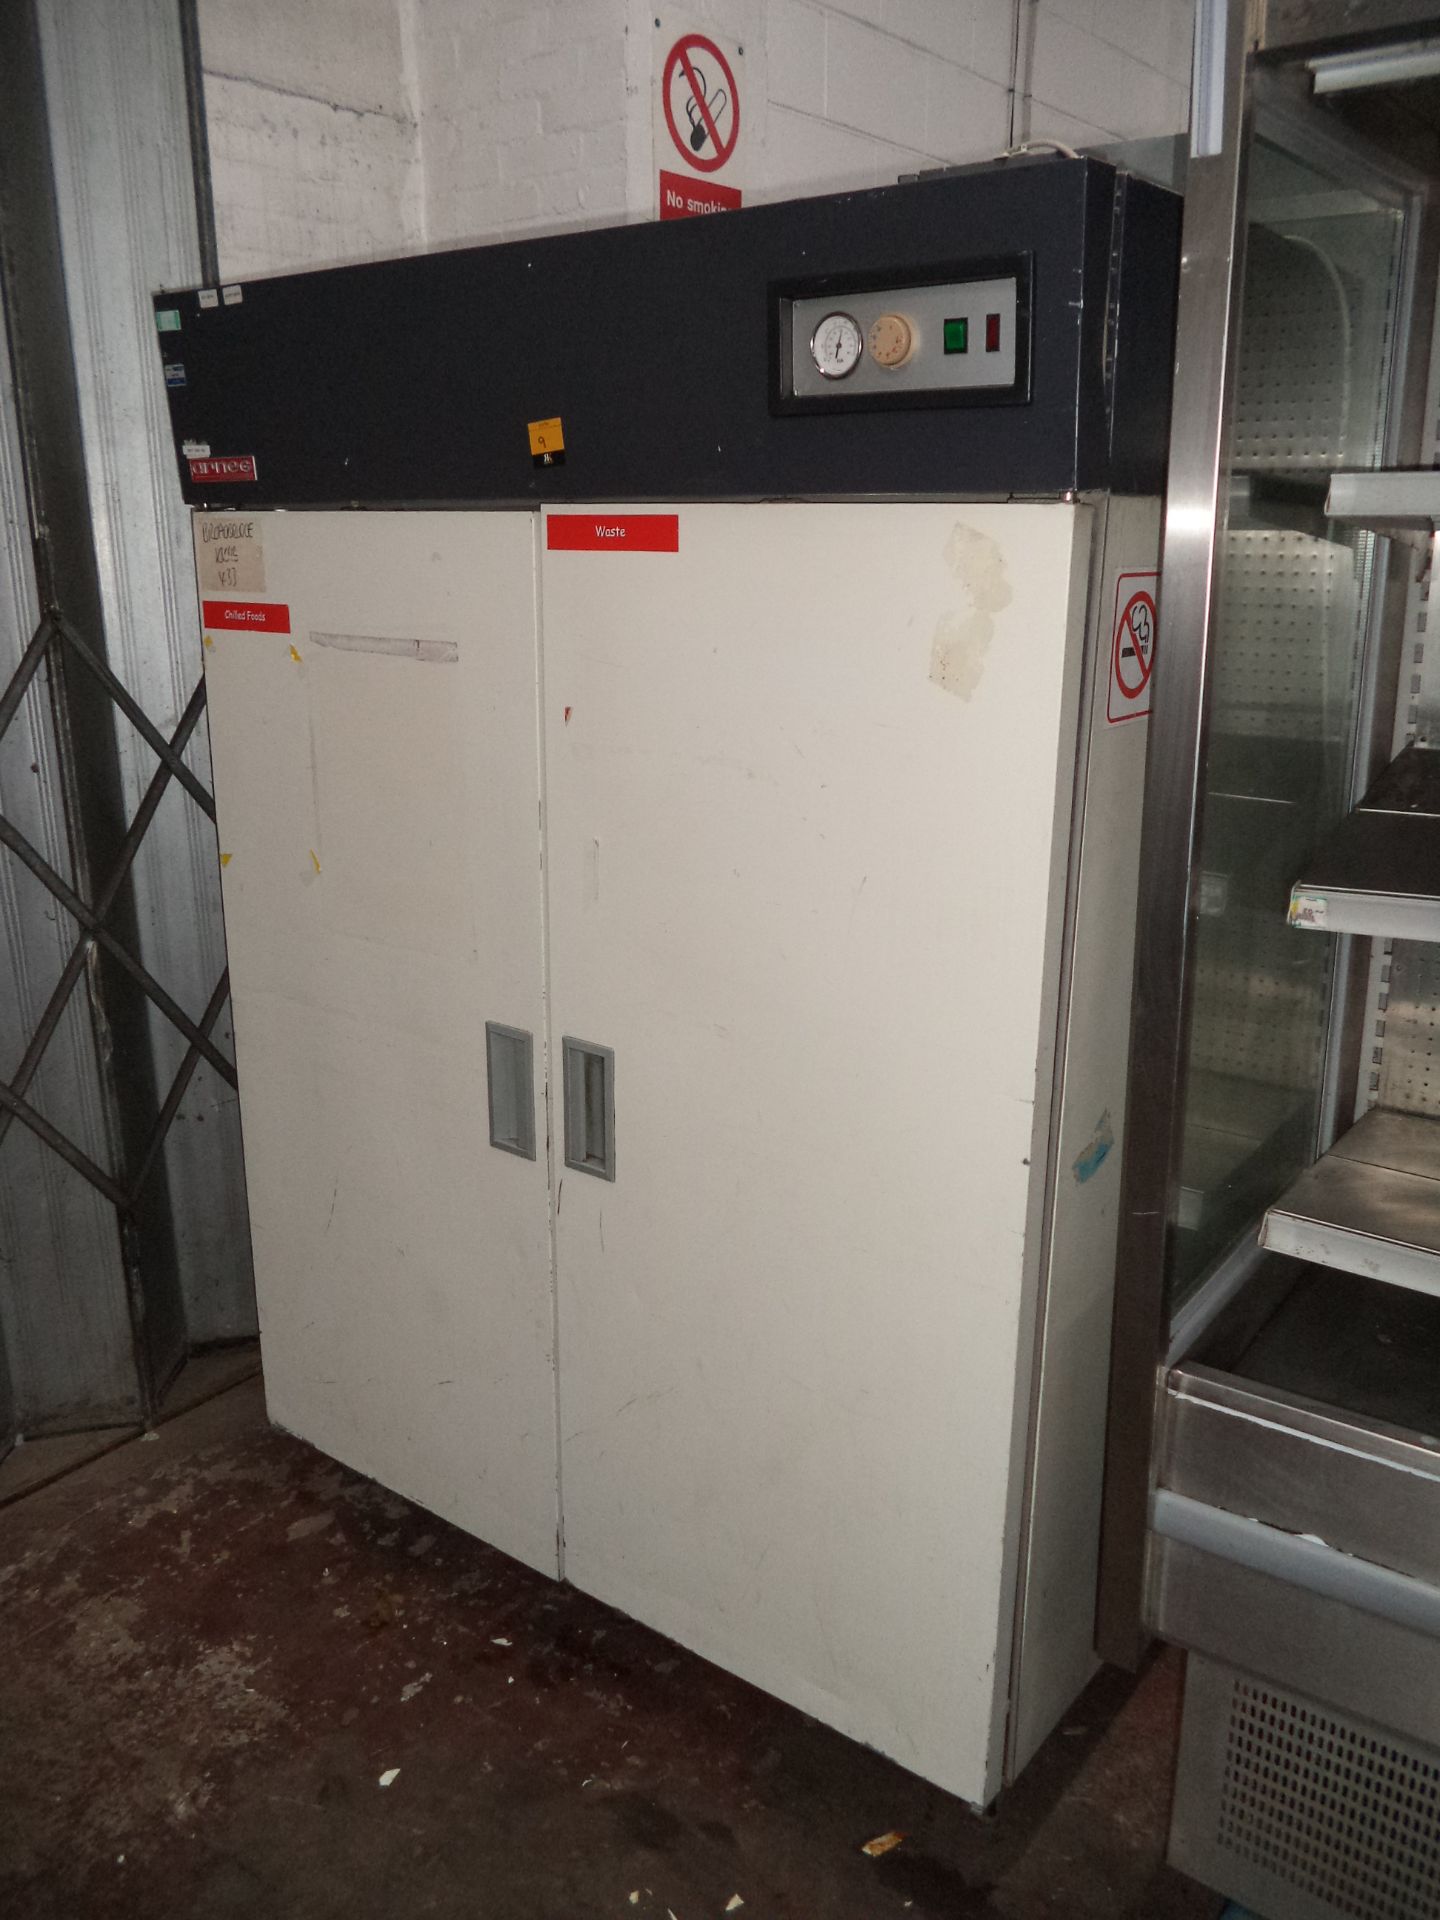 Arneg twin door fridge IMPORTANT: Please remember goods successfully bid upon must be paid for and